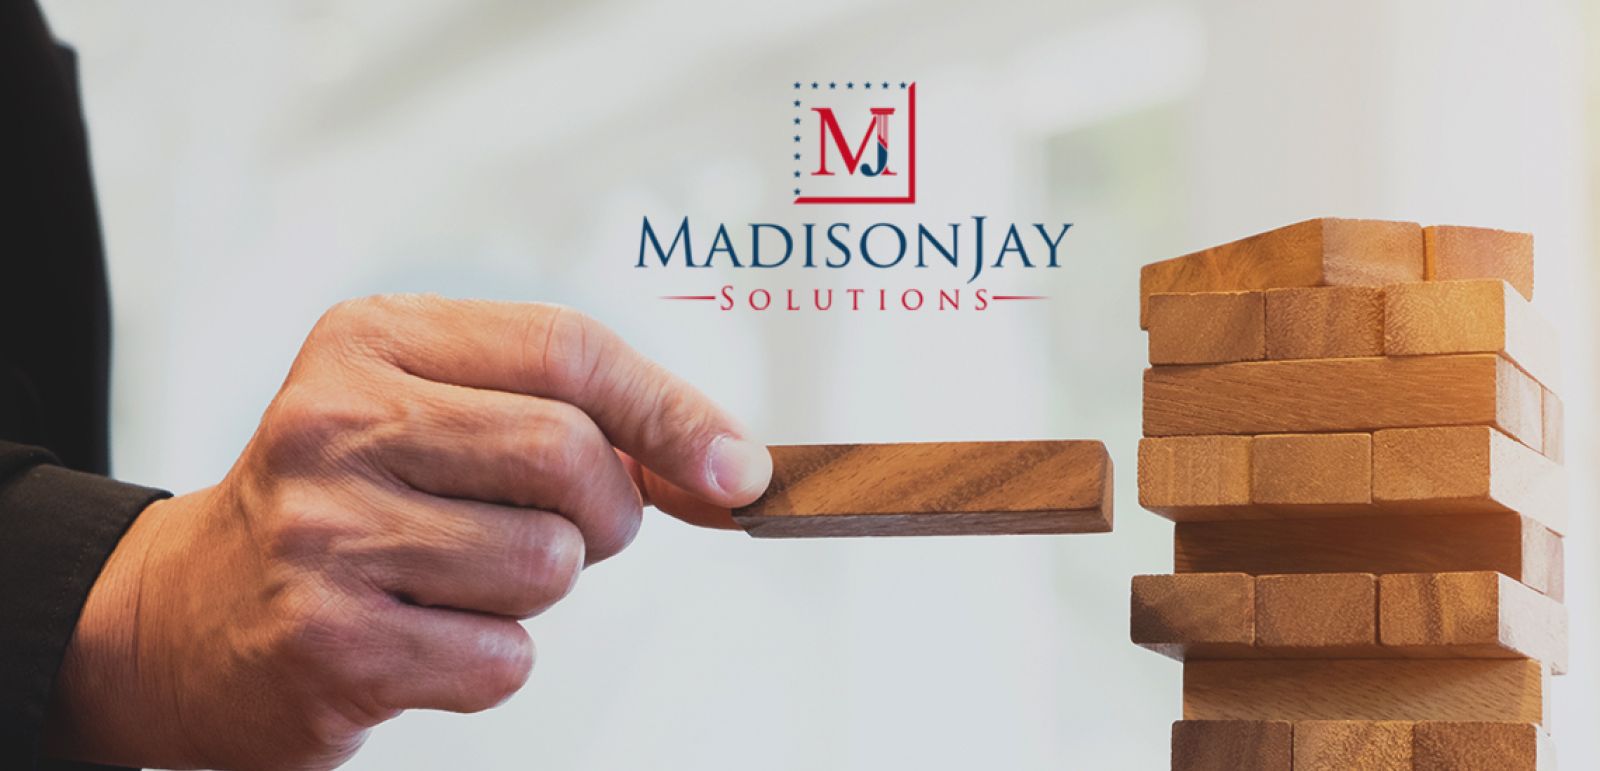 Photo for: MadisonJay Solutions - Legal Compliance Solutions Provider